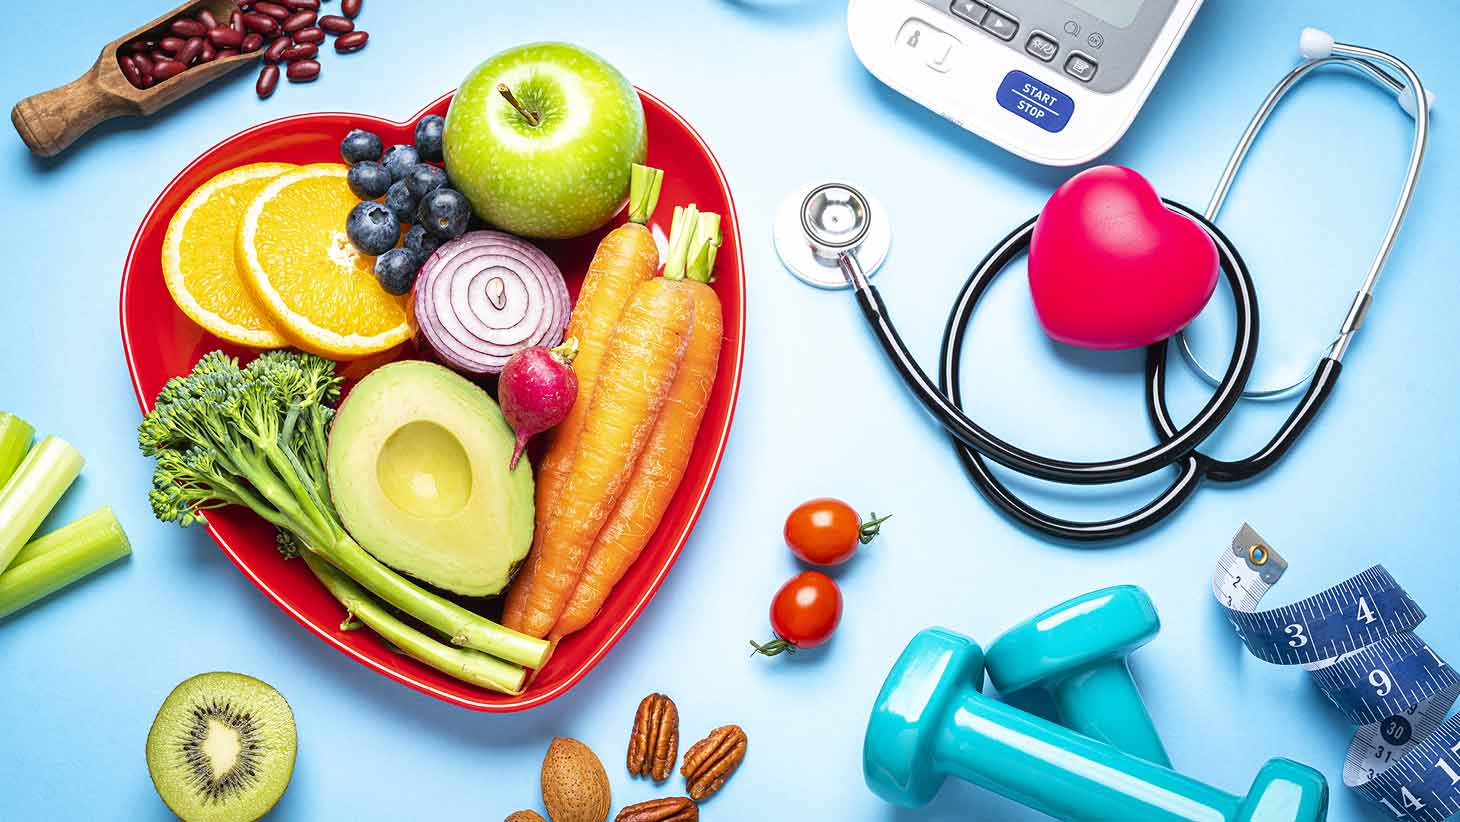 Health and Wellness Market Business Growth 2023, Industry Trends, Demand and Research Report by 2028